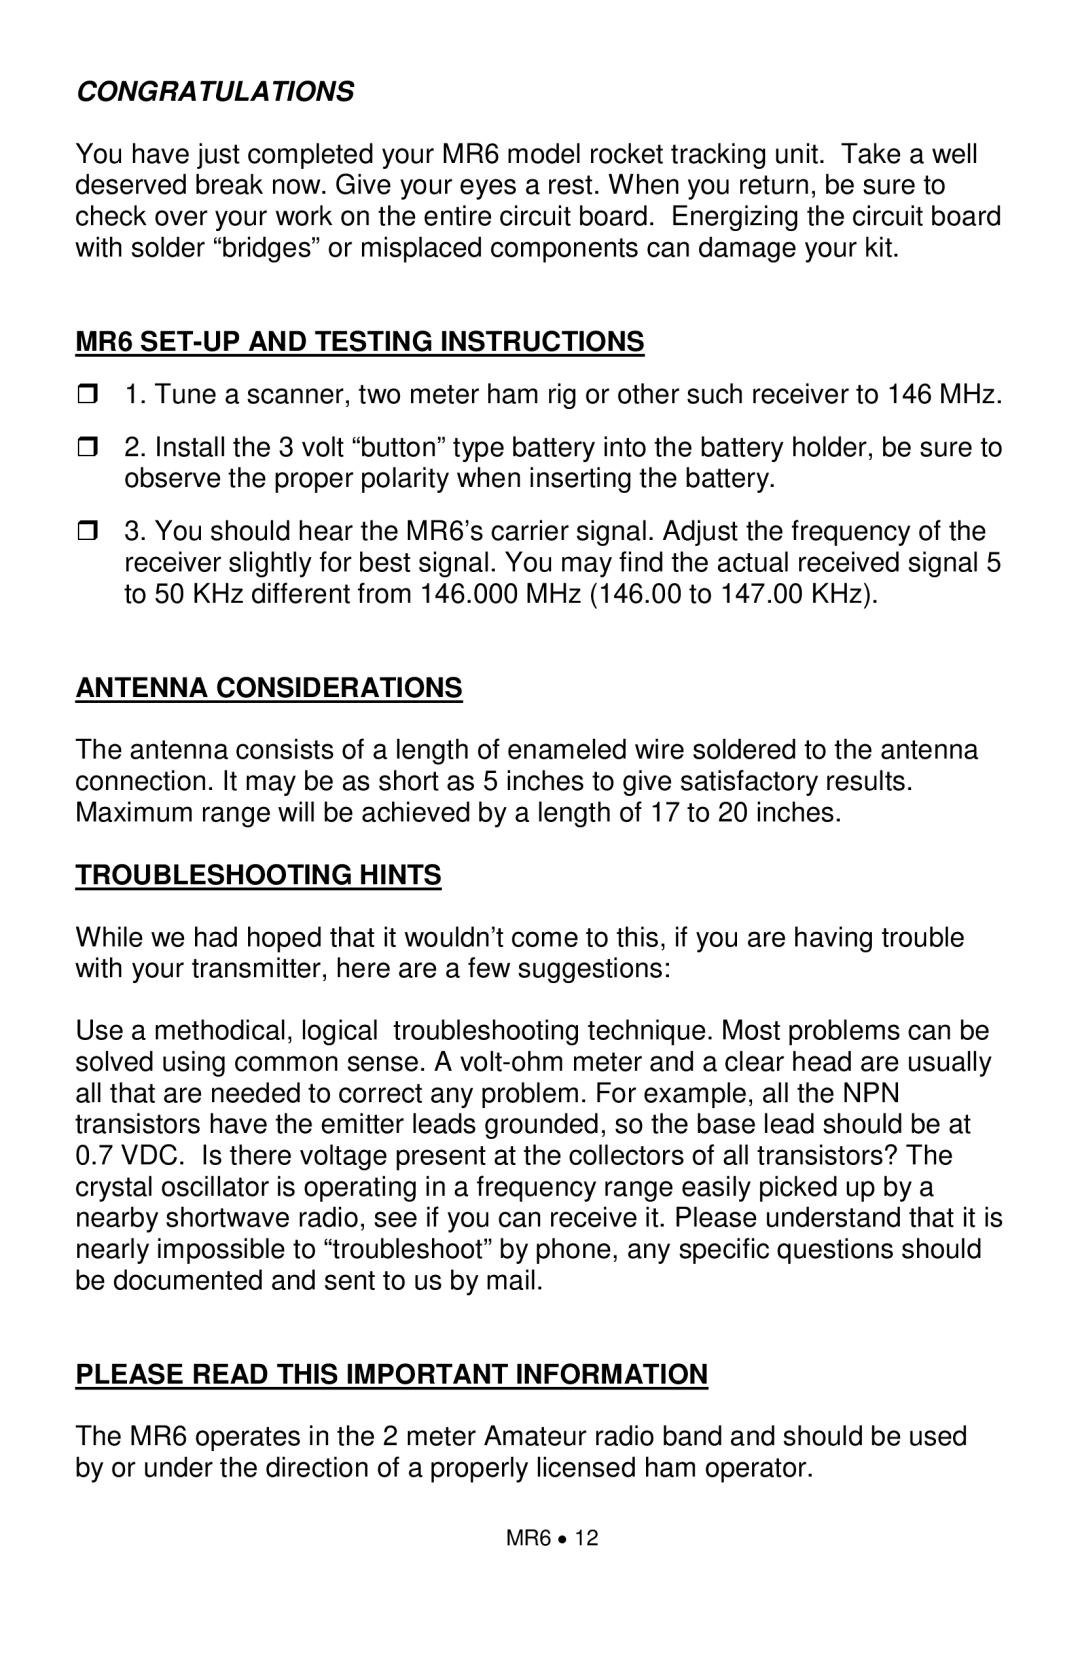 Ramsey Electronics Congratulations, MR6 SET-UPAND TESTING INSTRUCTIONS, Antenna Considerations, Troubleshooting Hints 